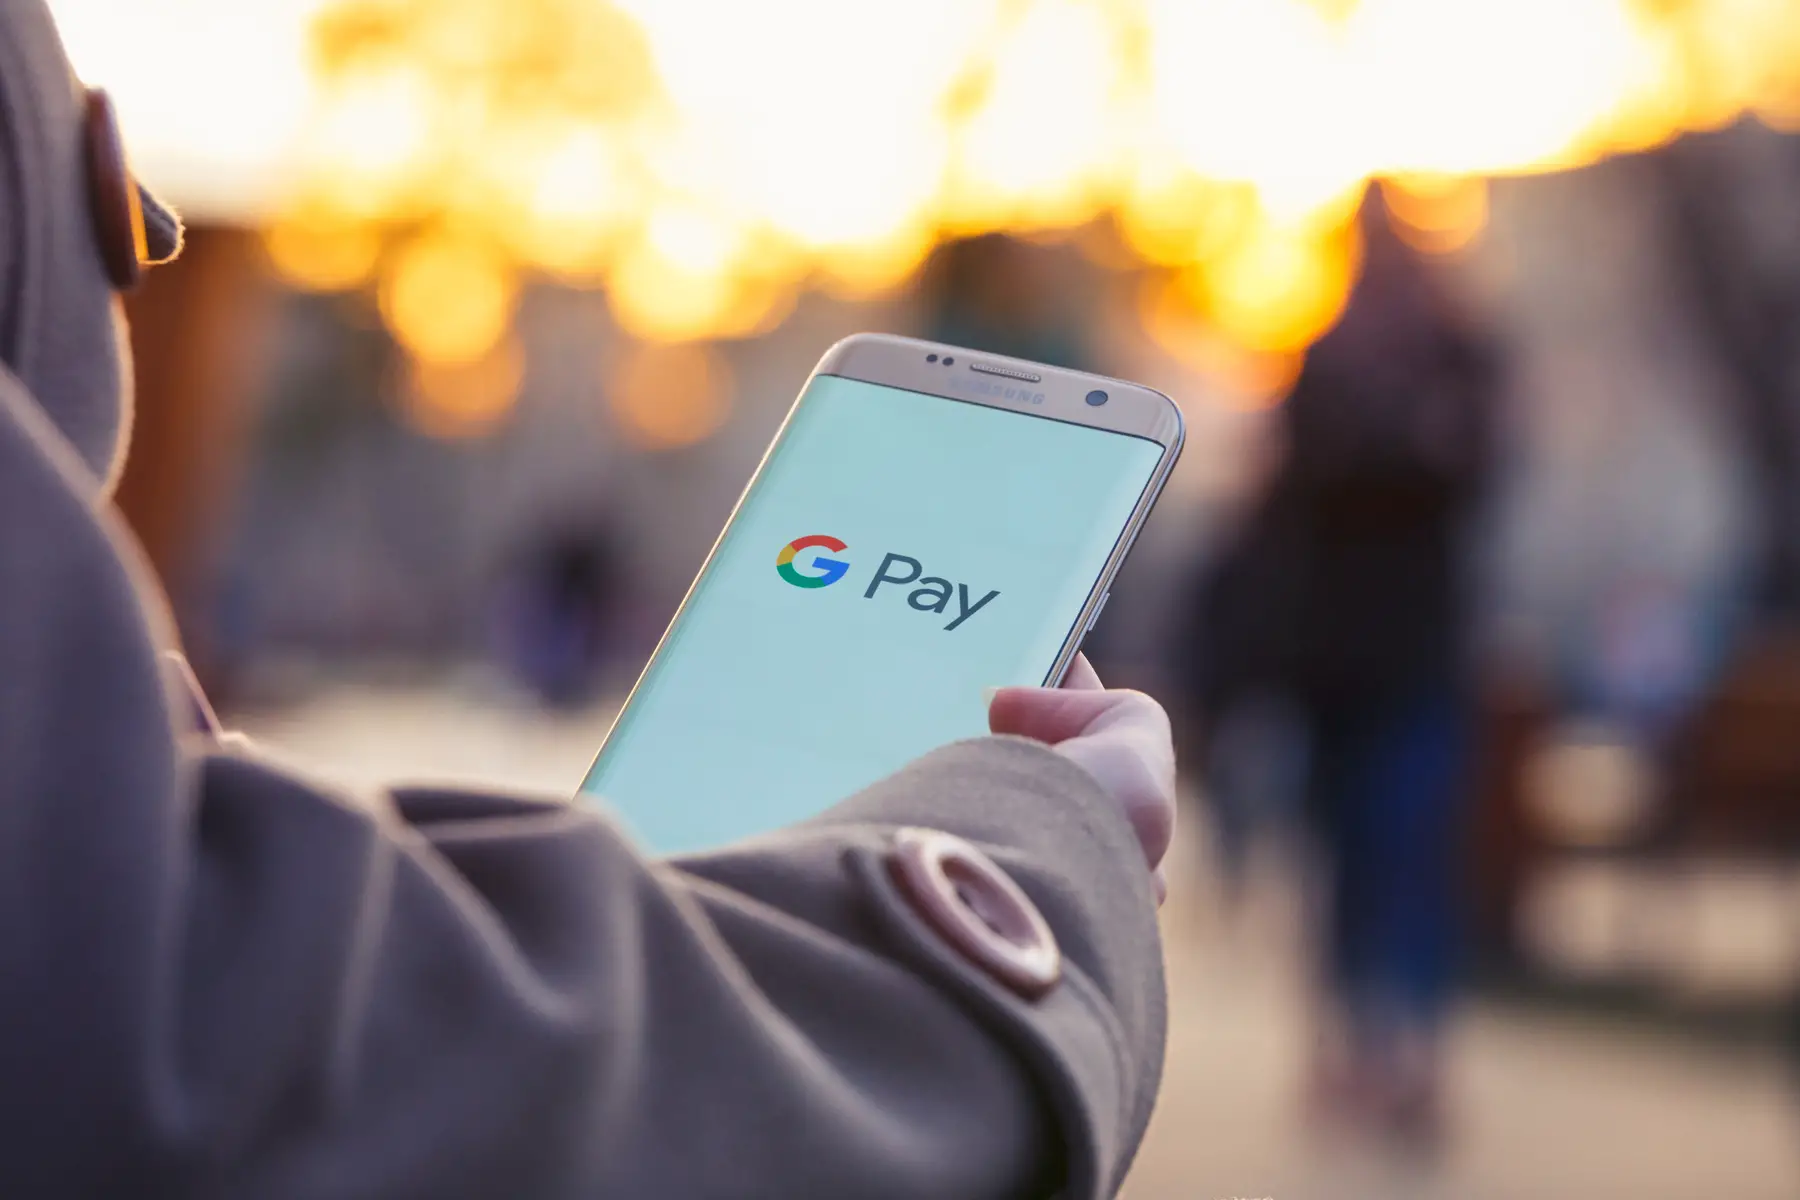 Google Pay on a mobile phone